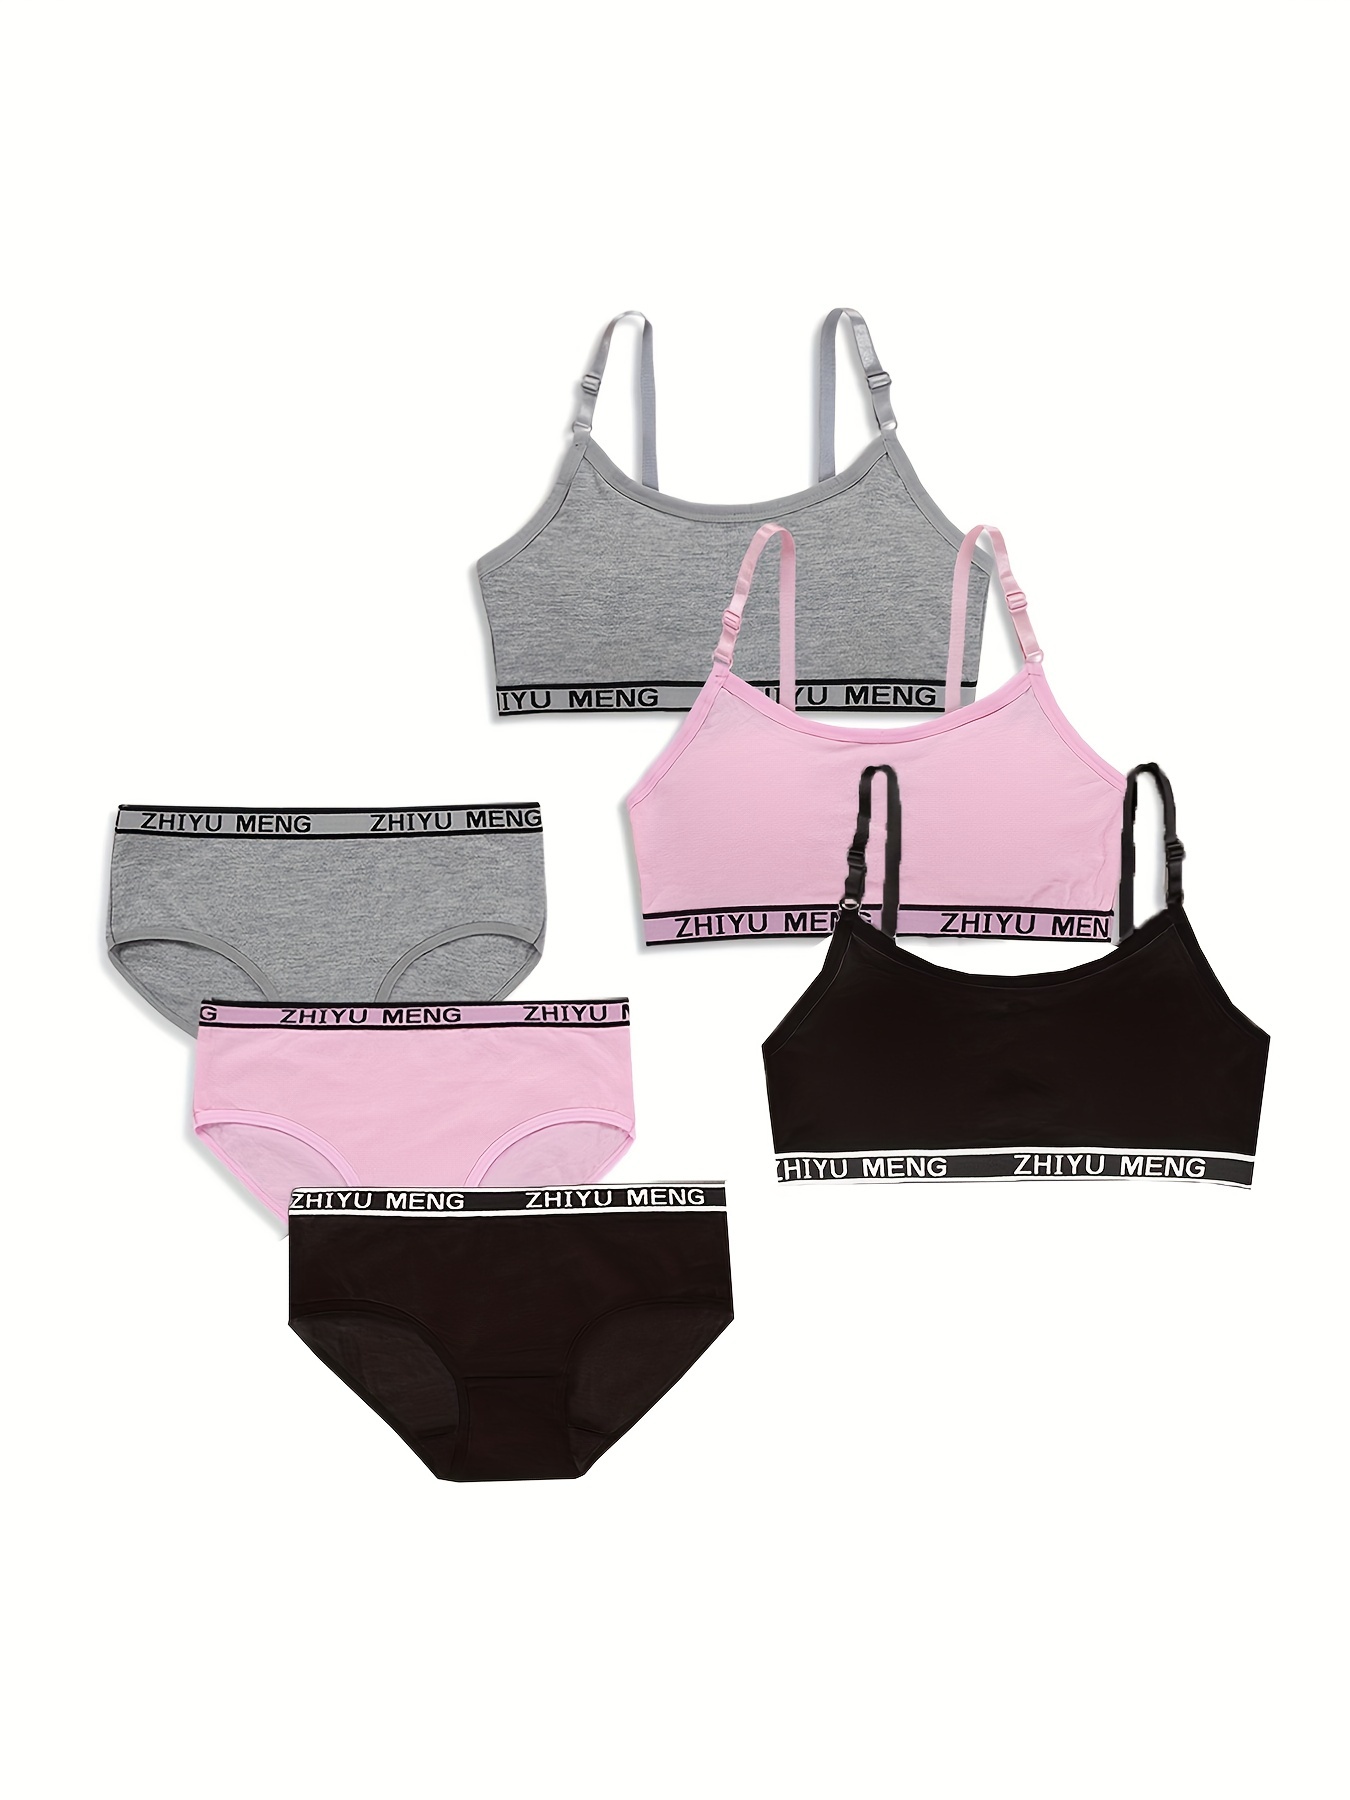  Cotton Soft Comfortable Elastic Girls Training Bras and Underwear  Set for 8-18 Years Old: Clothing, Shoes & Jewelry